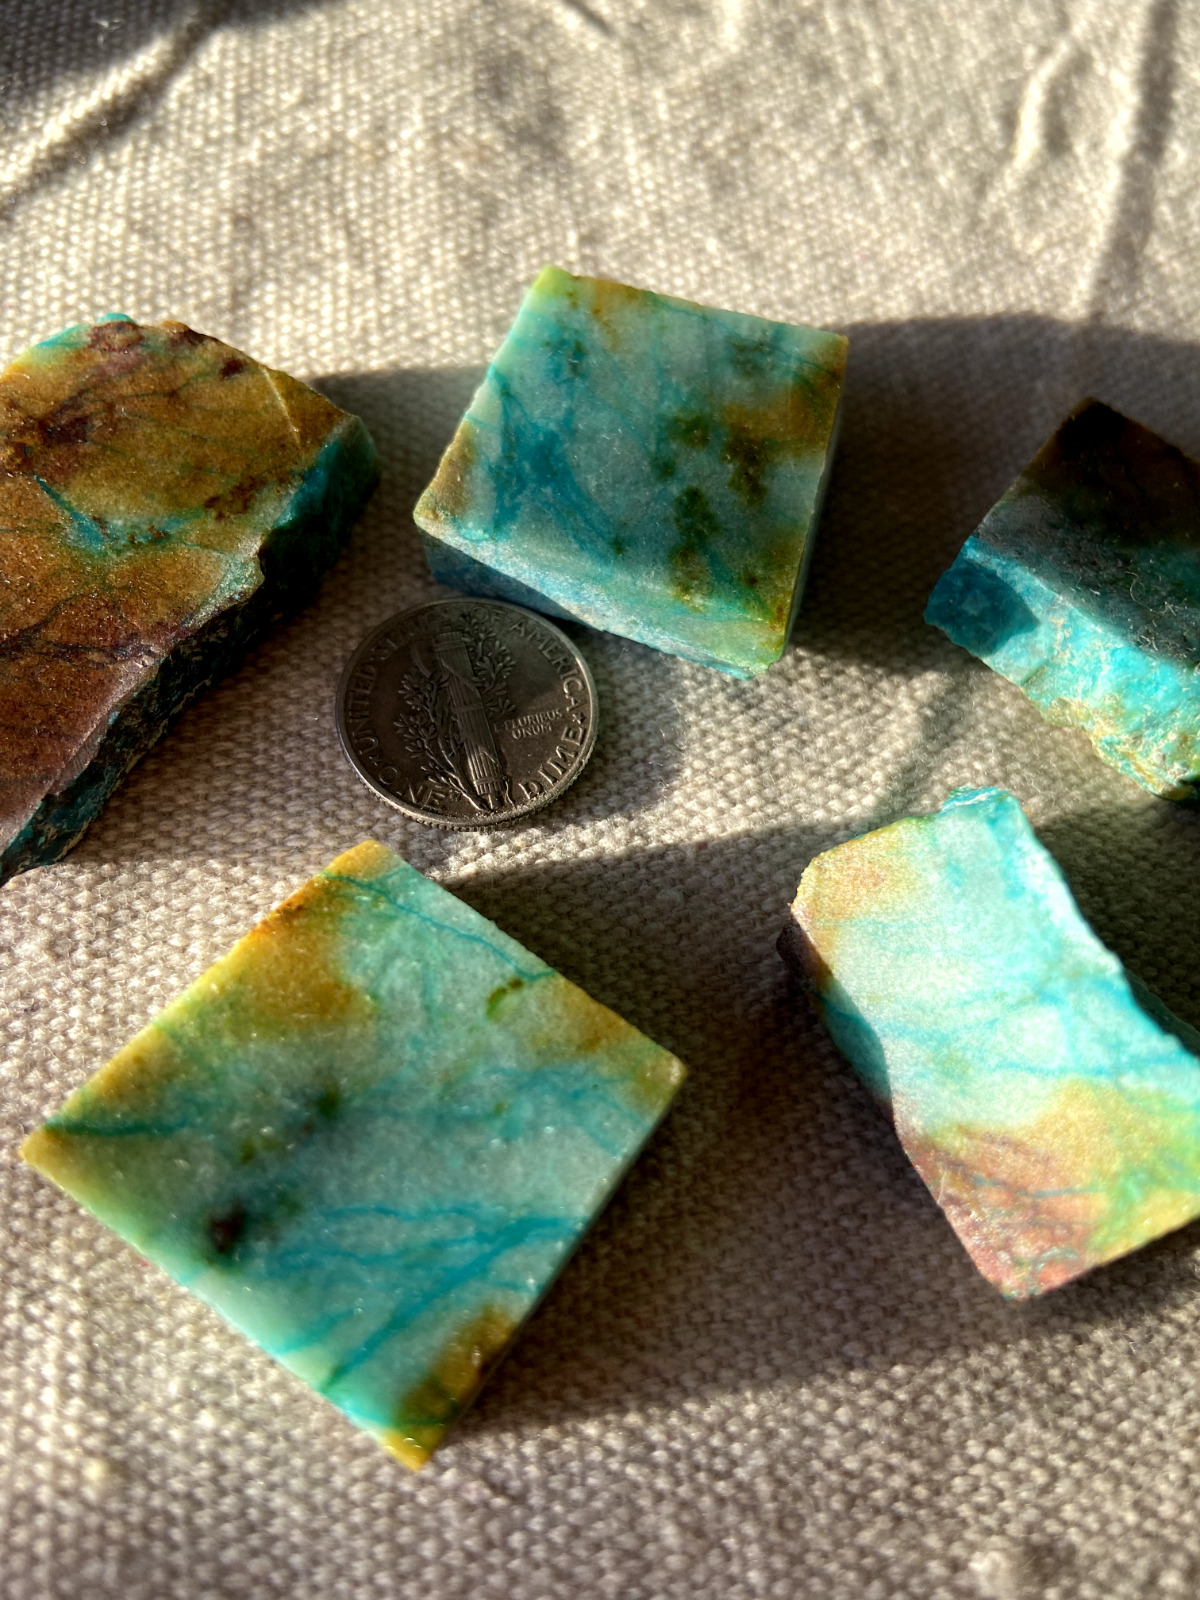 FLASH SALE 80% OFF UNBELIEVABLY Rare fossilized Turquoise parcel *CALIFORNIA